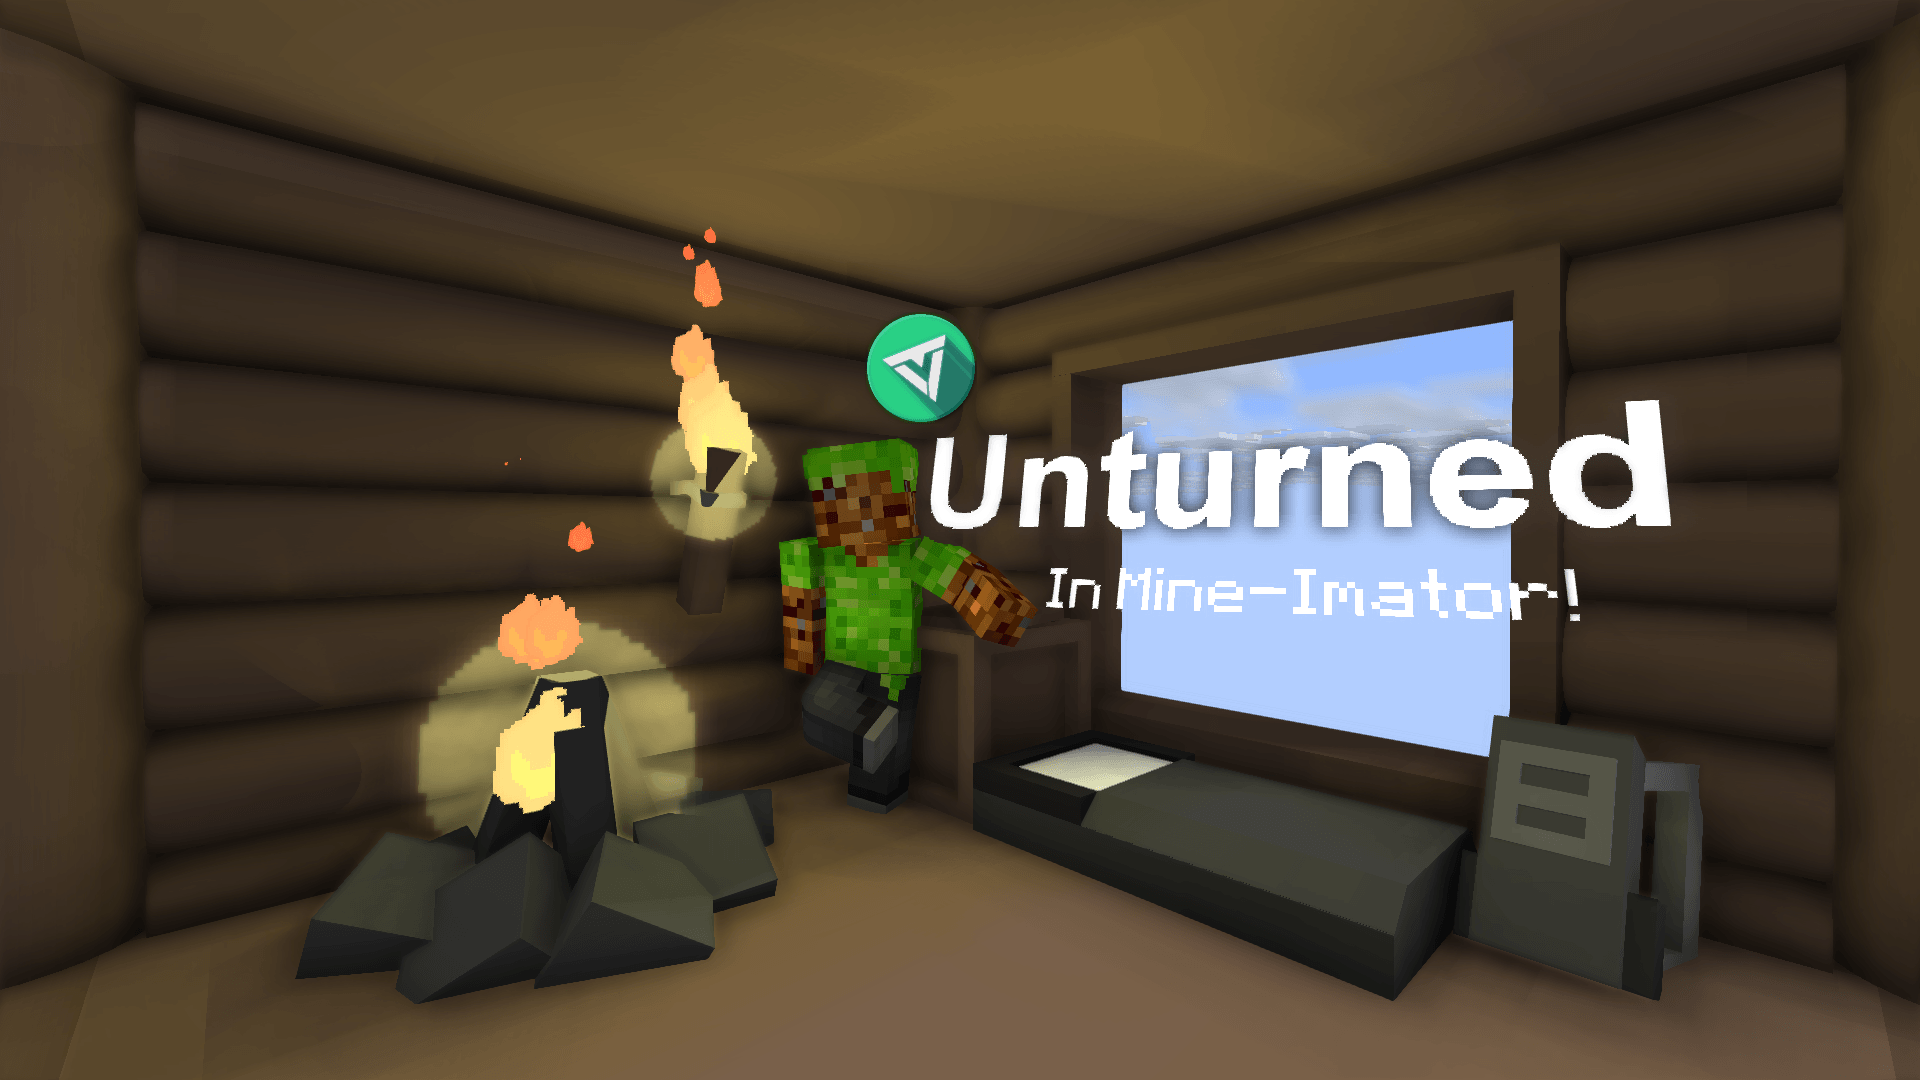 4K Unturned with my Unturned Rigs!